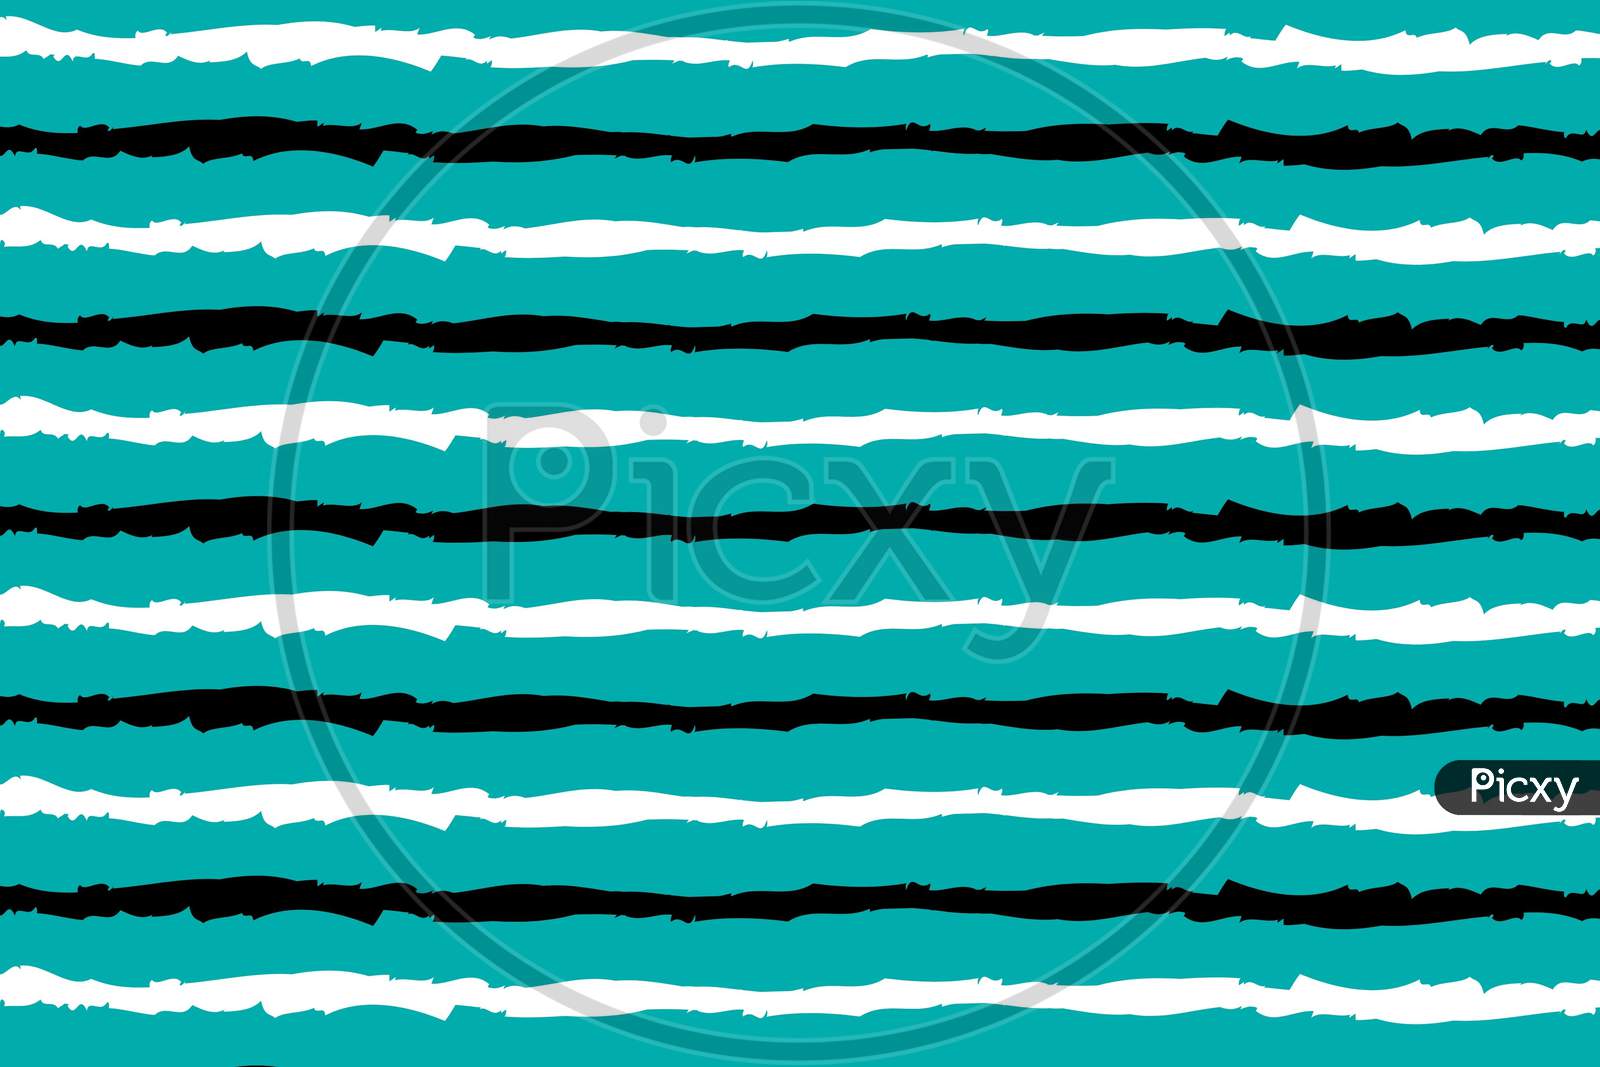 Black Lines Abstract Or Illustration For Video Background